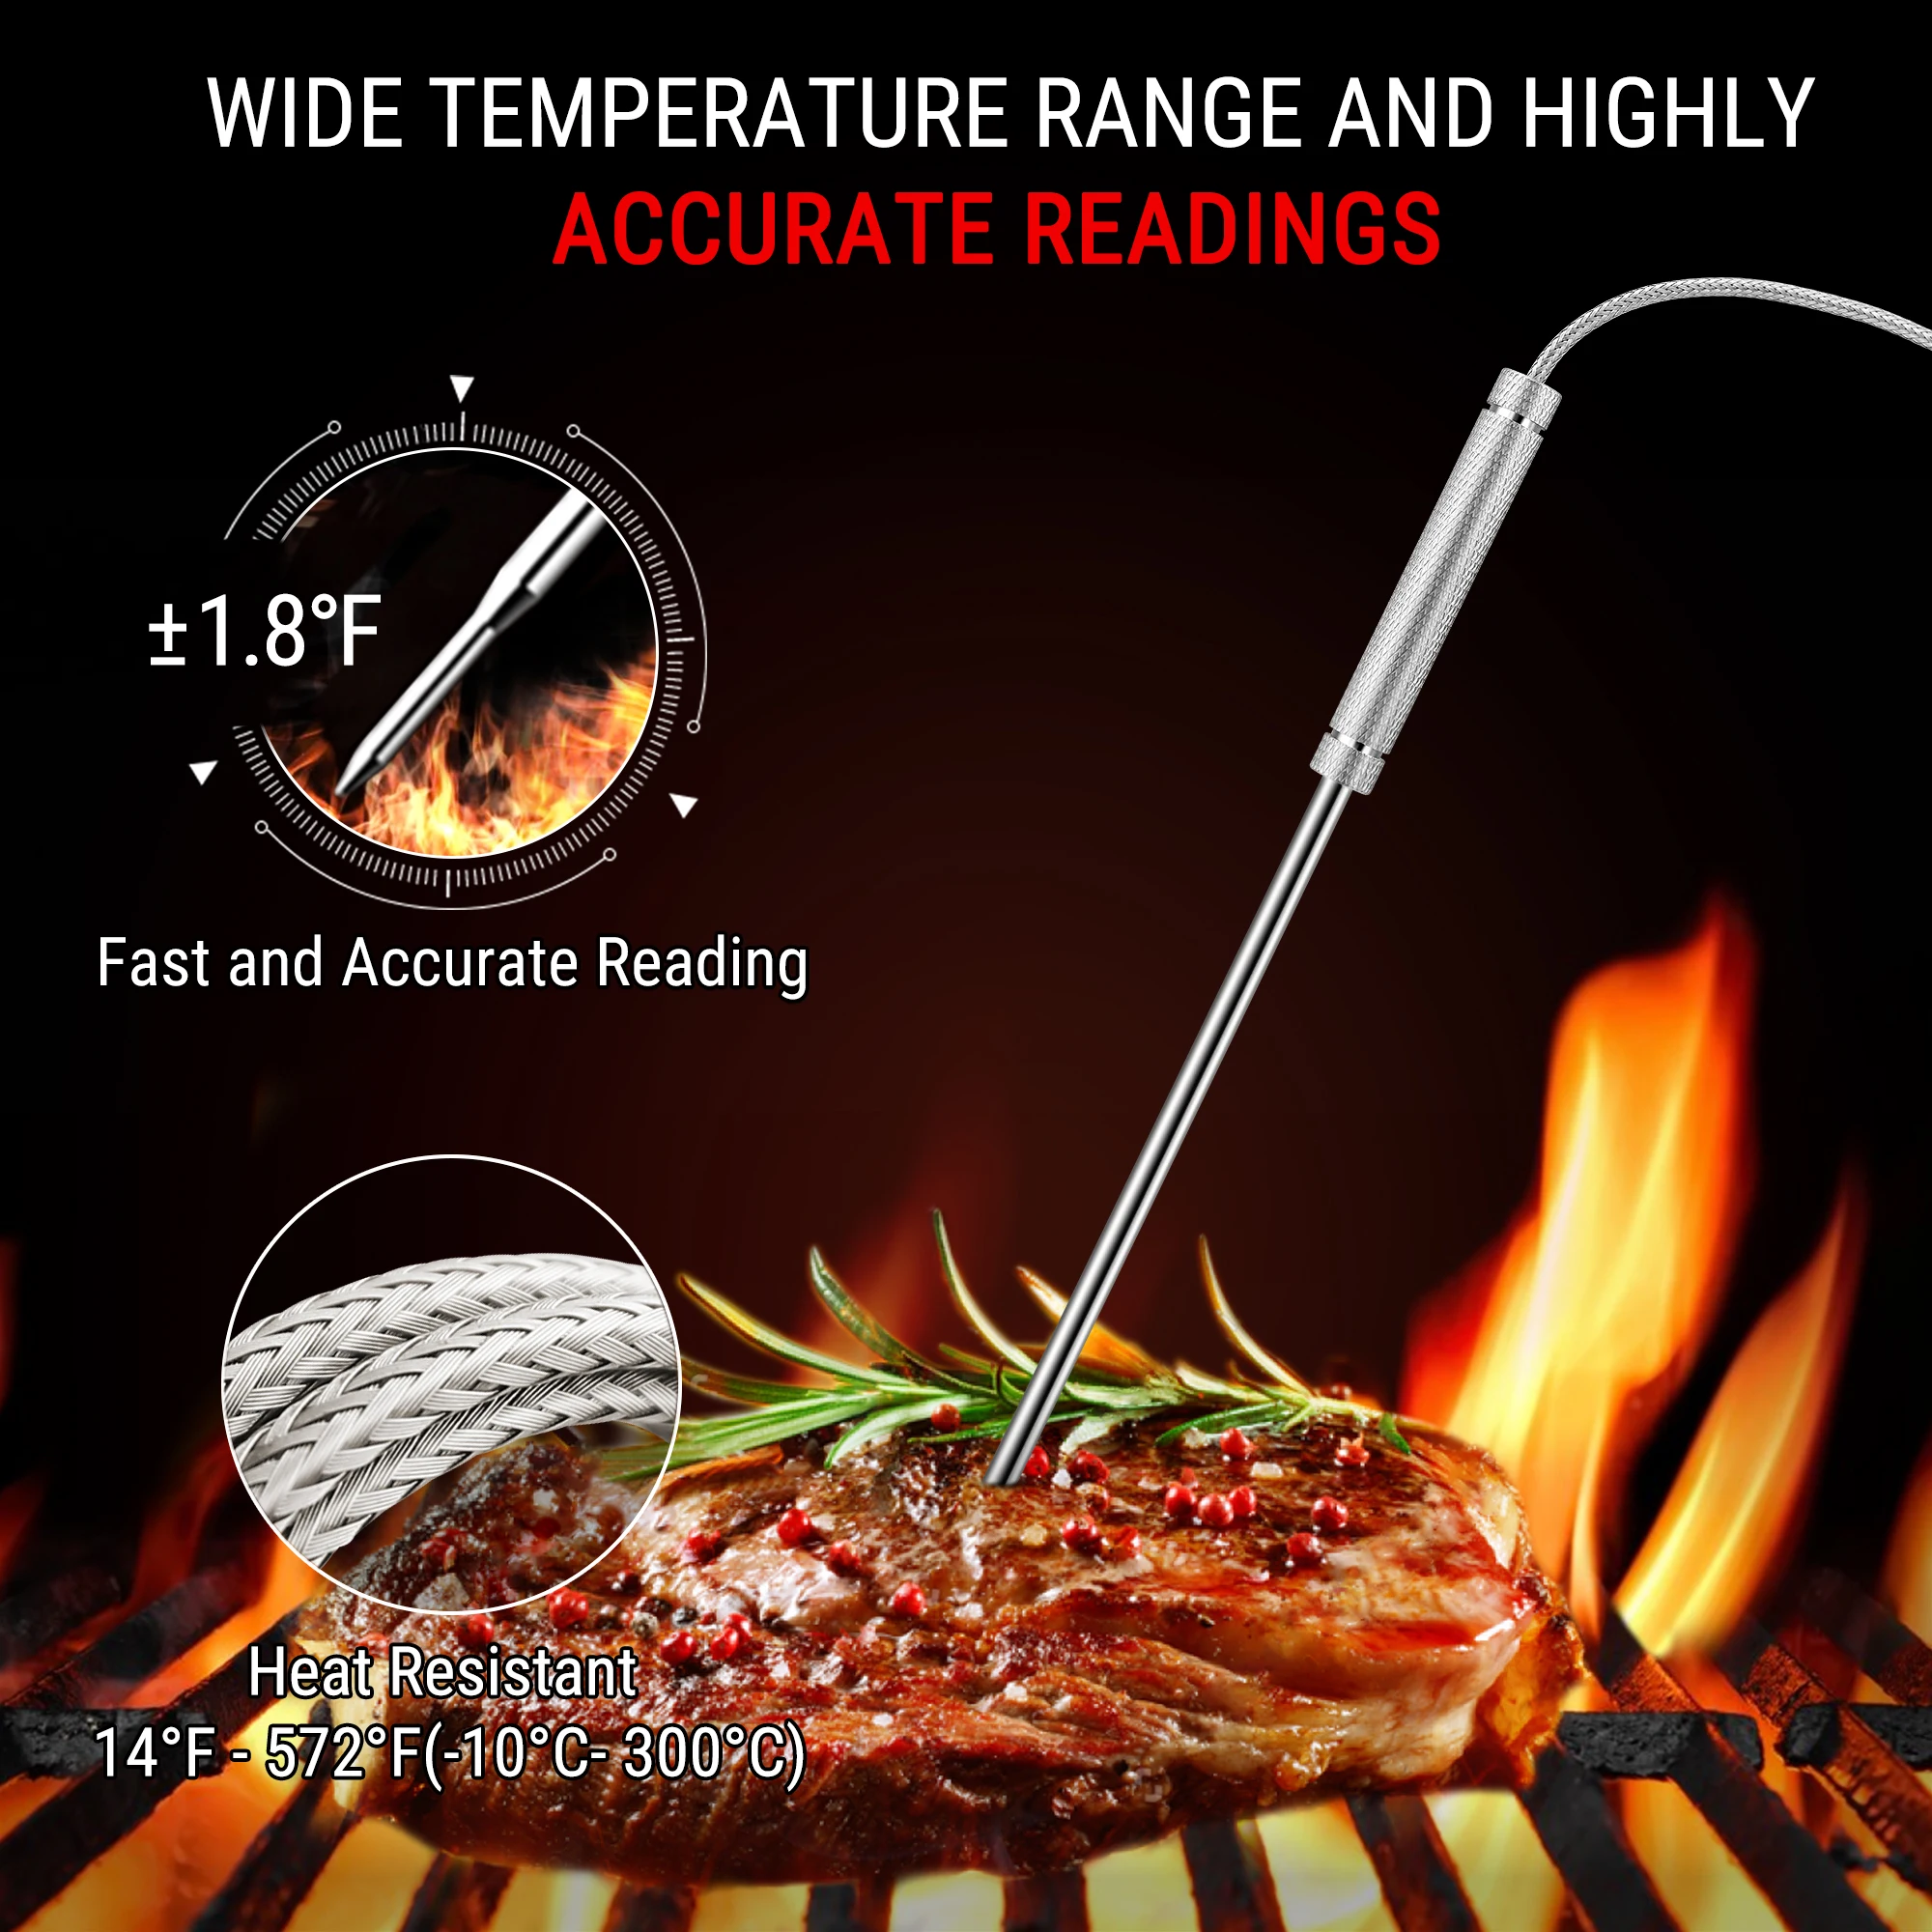 https://ae01.alicdn.com/kf/Hec45d8623a5d43a5bf32ee74b6eb7f47Y/ThermoPro-TP27C-4-Meat-Probes-150M-Wireless-Digital-Thermometer-Kitchen-Cooking-Thermometer-For-Meat-Oven-Thermometer.jpg